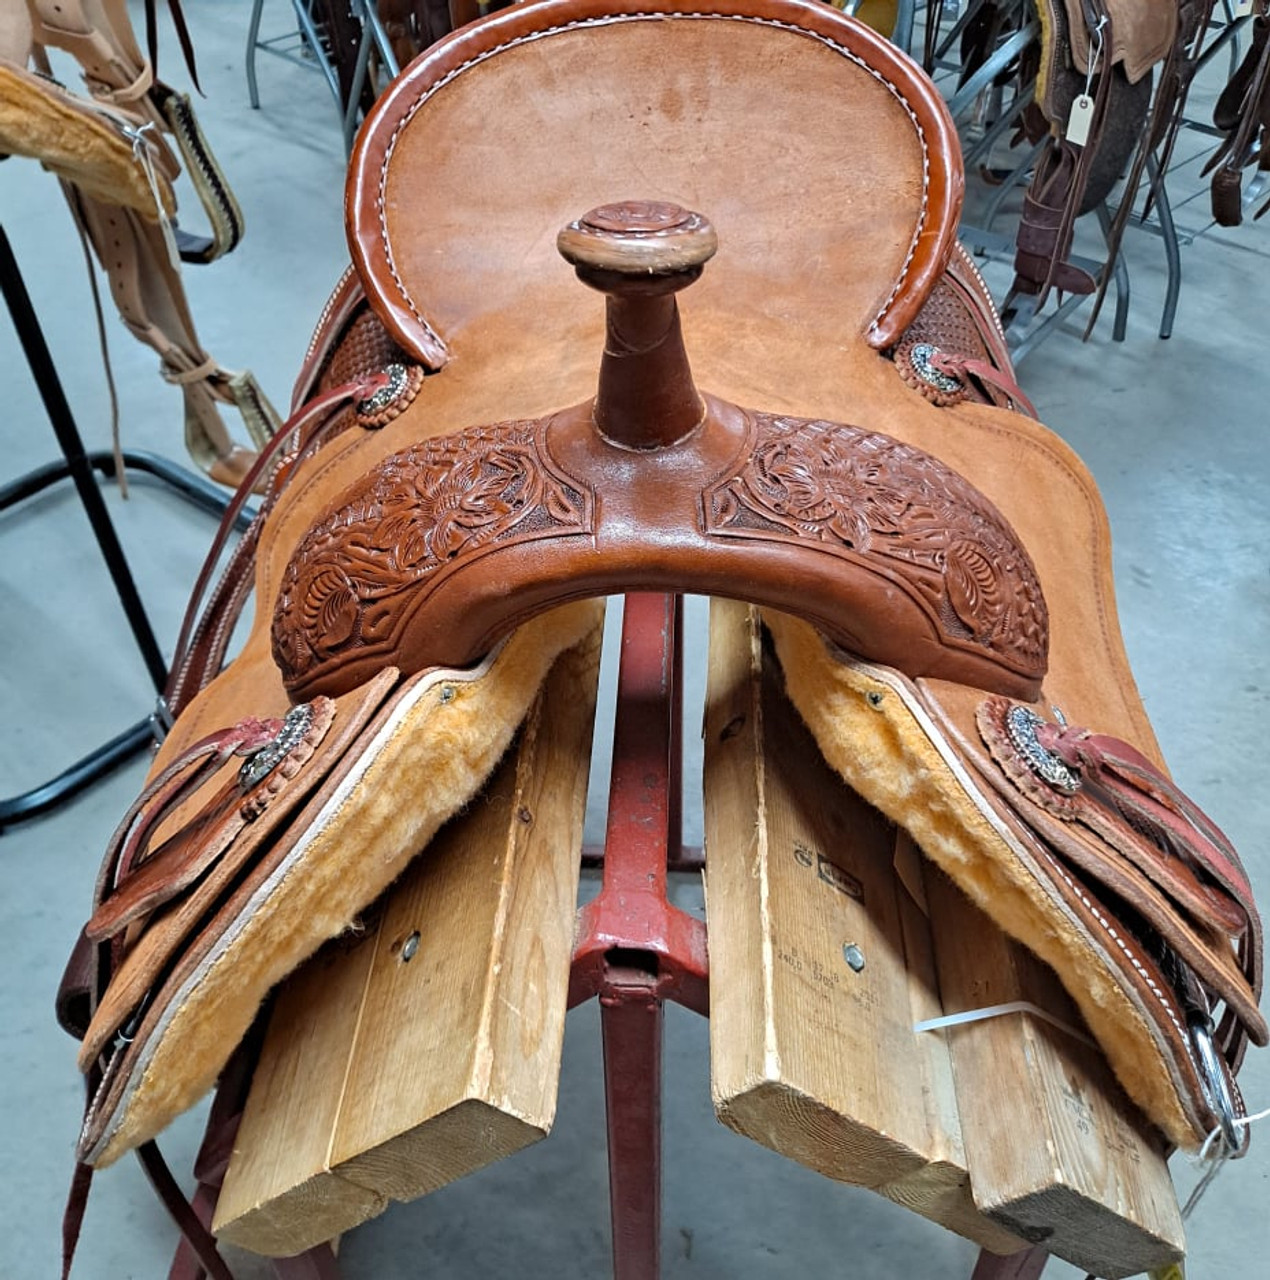 New Jackson Stock Saddle by Fort Worth Saddle Co with 15 inch seat. Sorrel Hermann Oak leather. Roughout contact points. Gullet size is 8 inch, weight is 28lbs, and skirt is 26.5 inch. Made in USA. Limited lifetime warranty.

S1446